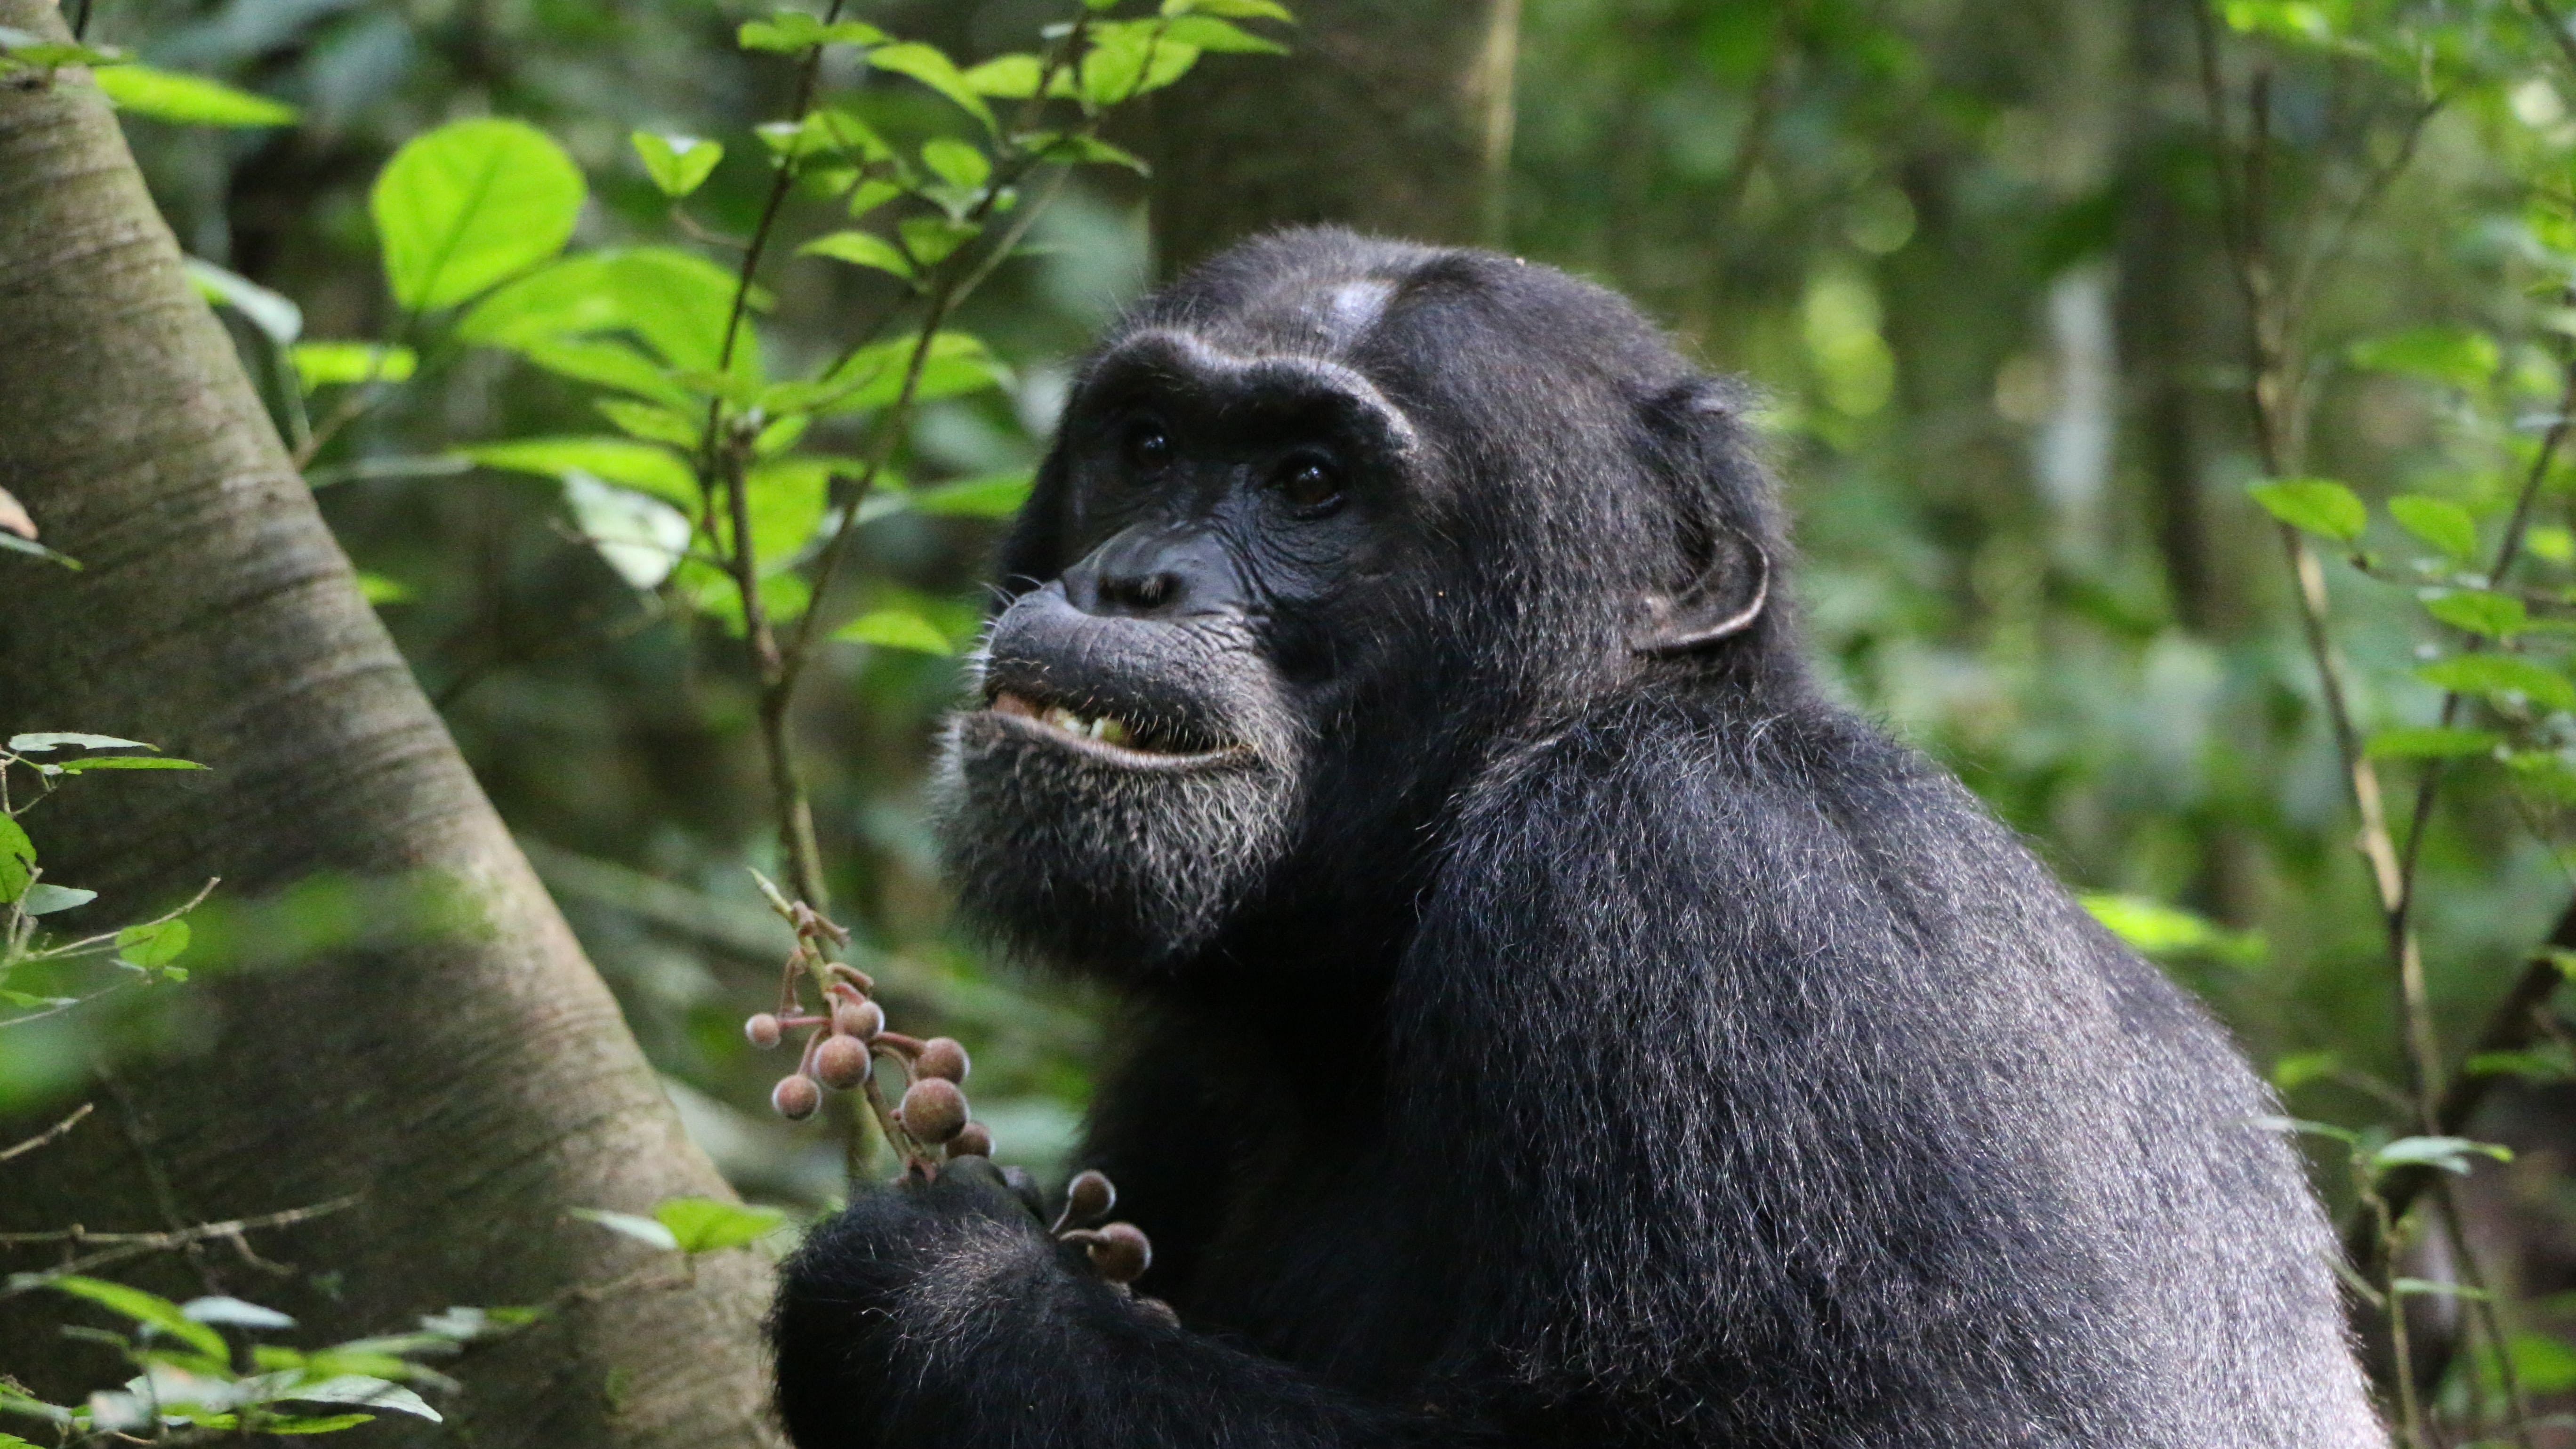 Chimps helping scientists find plants that have potential to become medicines